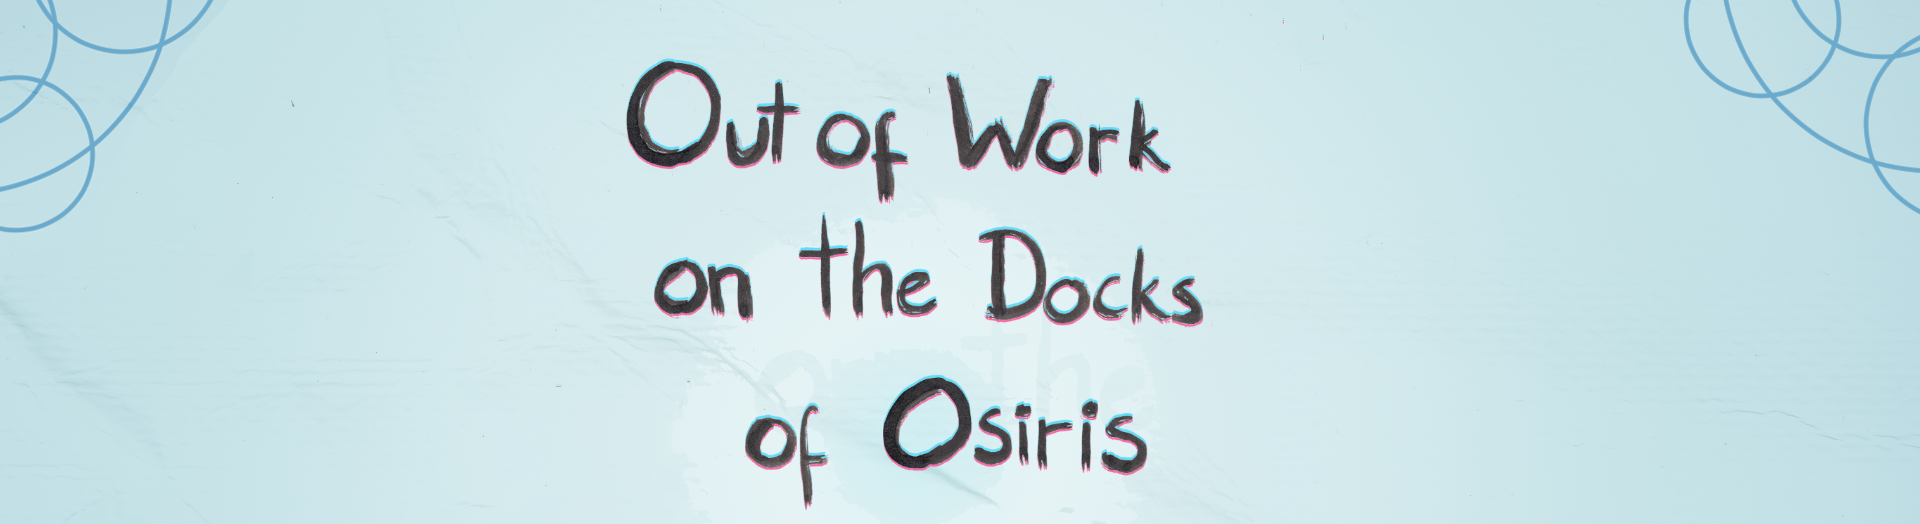 Out of work on the docks of osiris mac os update